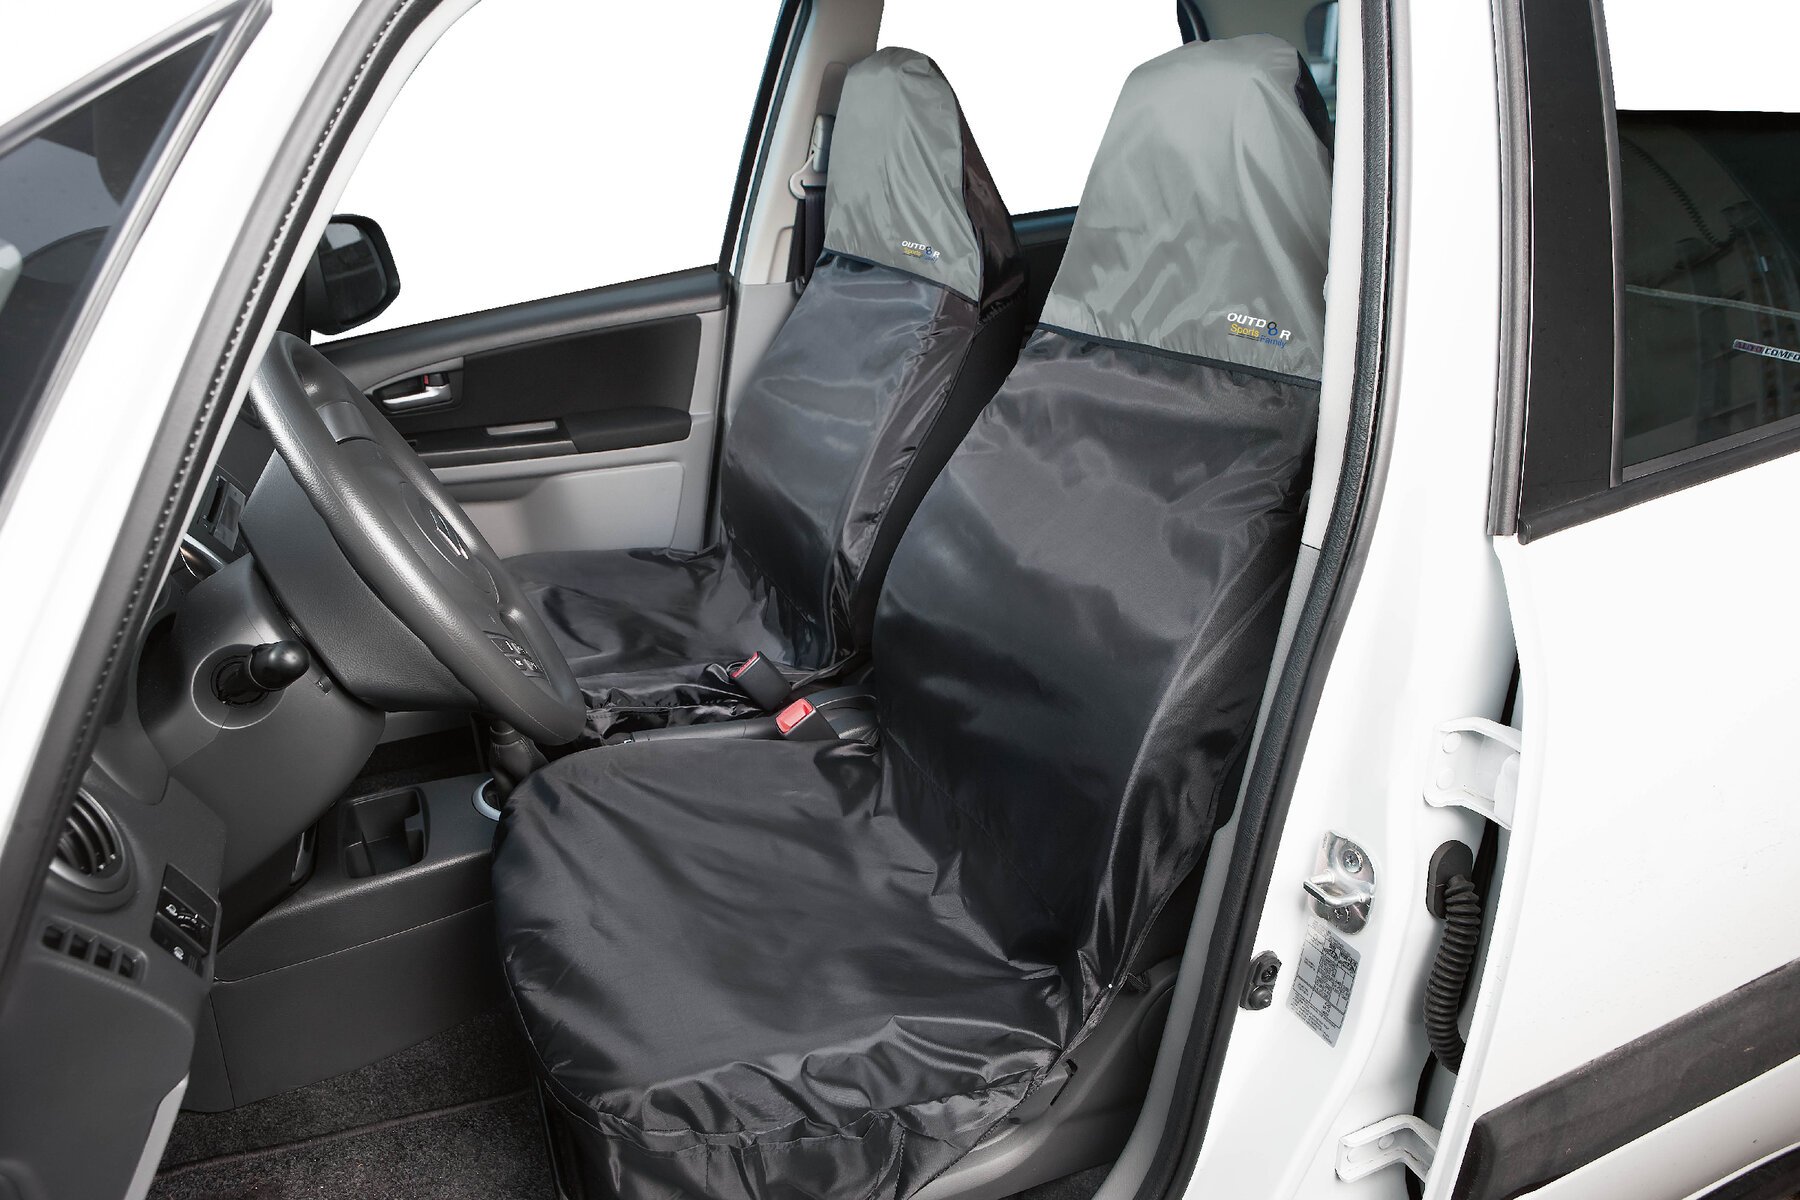 Outdoor Sports car Seat cover grey